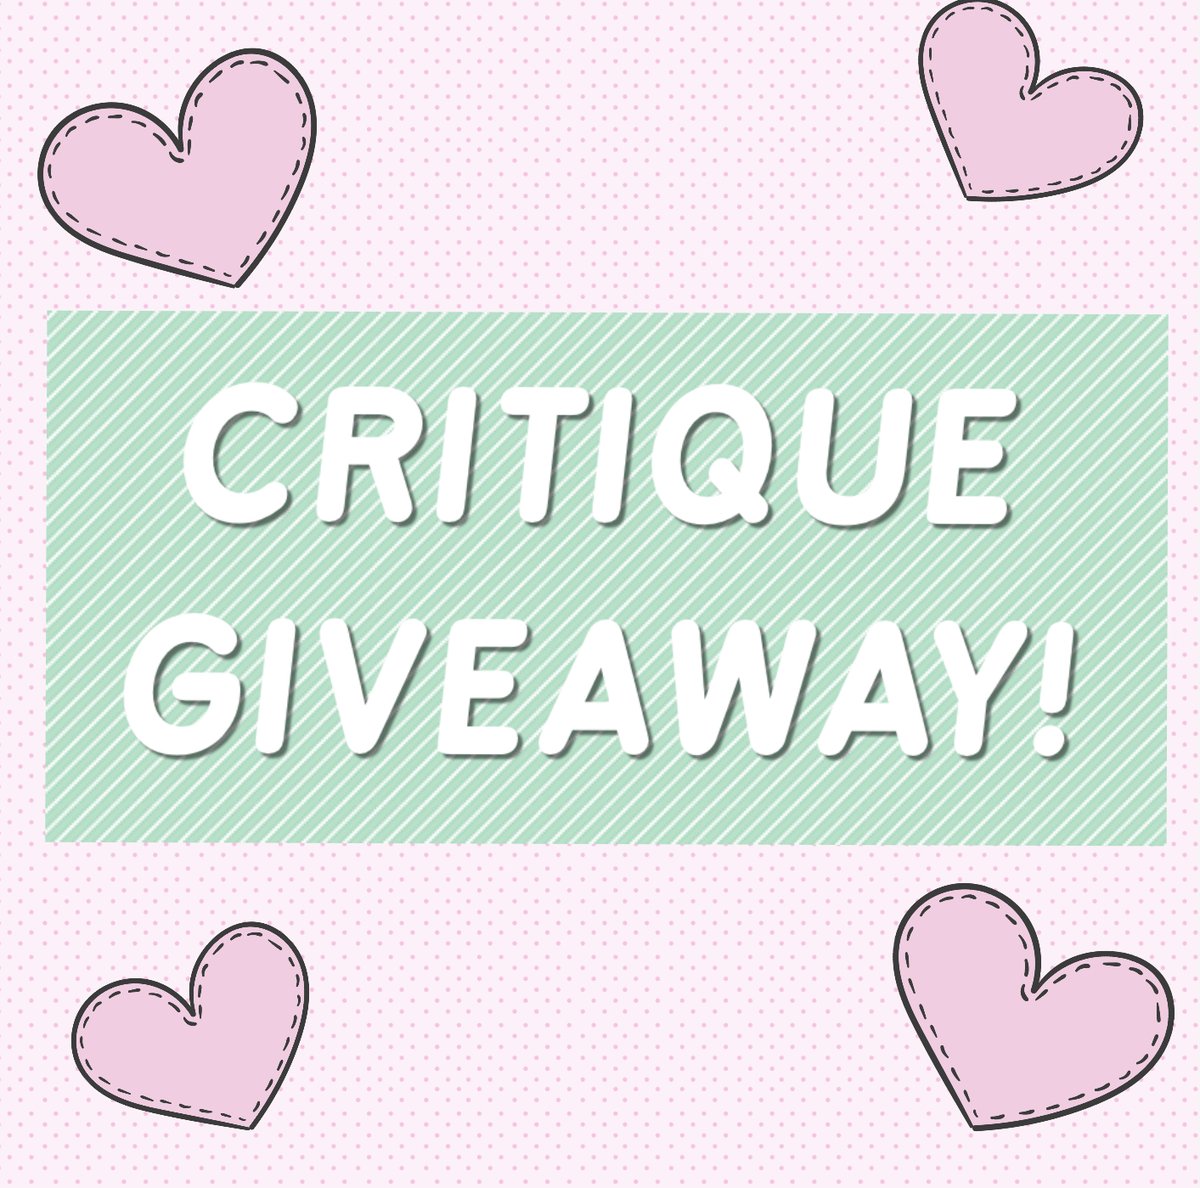 I'm doing a critique giveaway to celebrate reaching 4,500 followers! Comment below if you have a non rhyming picture book you'd like me to look at. I'll pick 10 winners. 😊